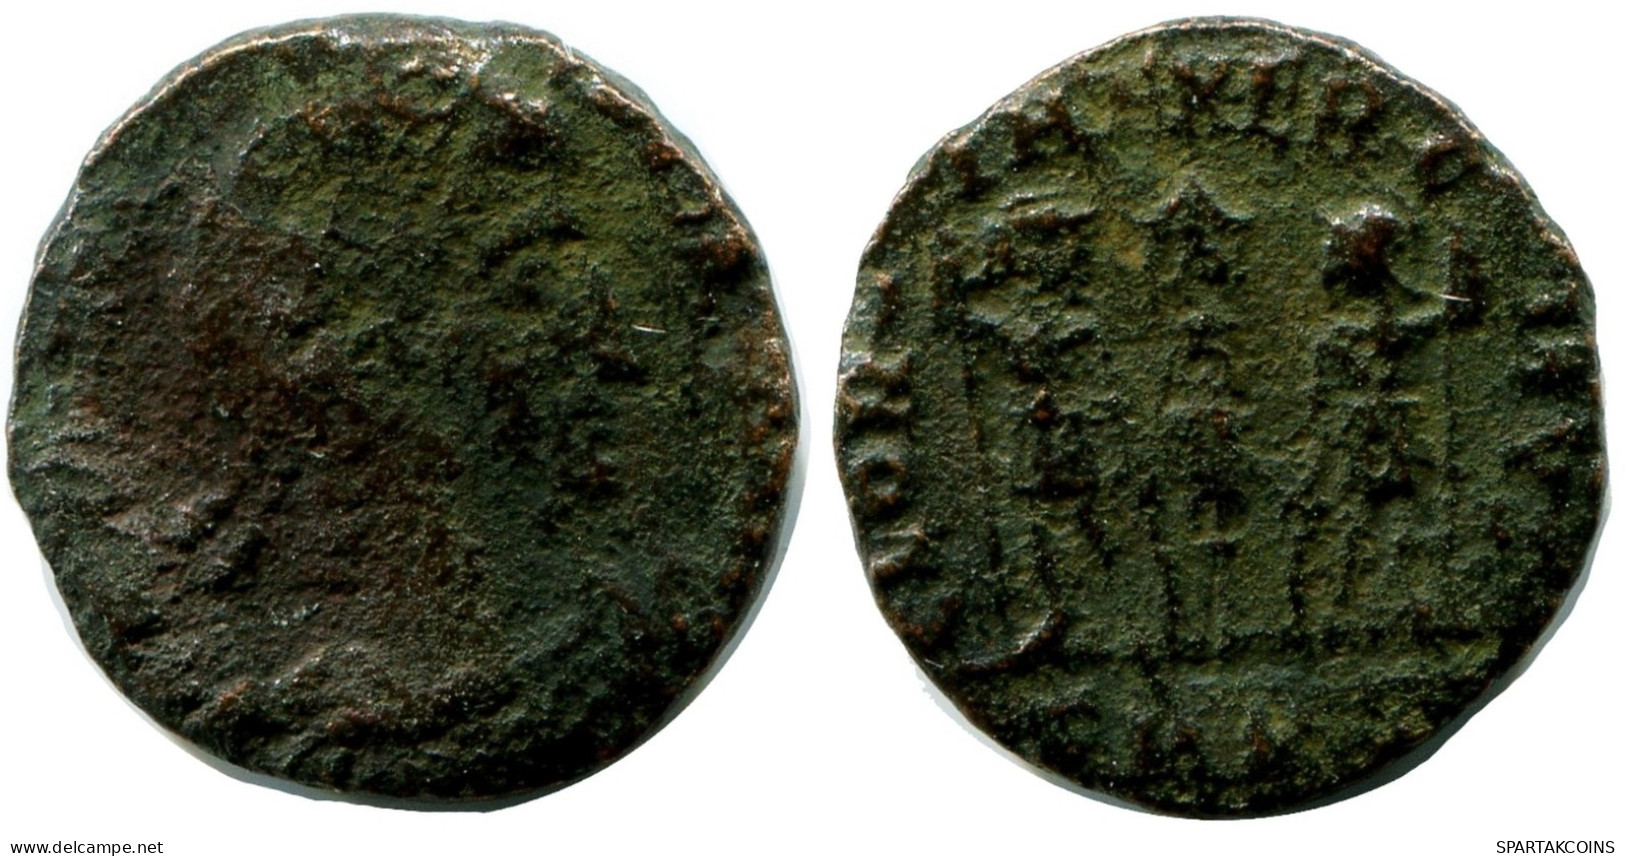 ROMAN Coin MINTED IN CYZICUS FOUND IN IHNASYAH HOARD EGYPT #ANC11047.14.D.A - El Imperio Christiano (307 / 363)